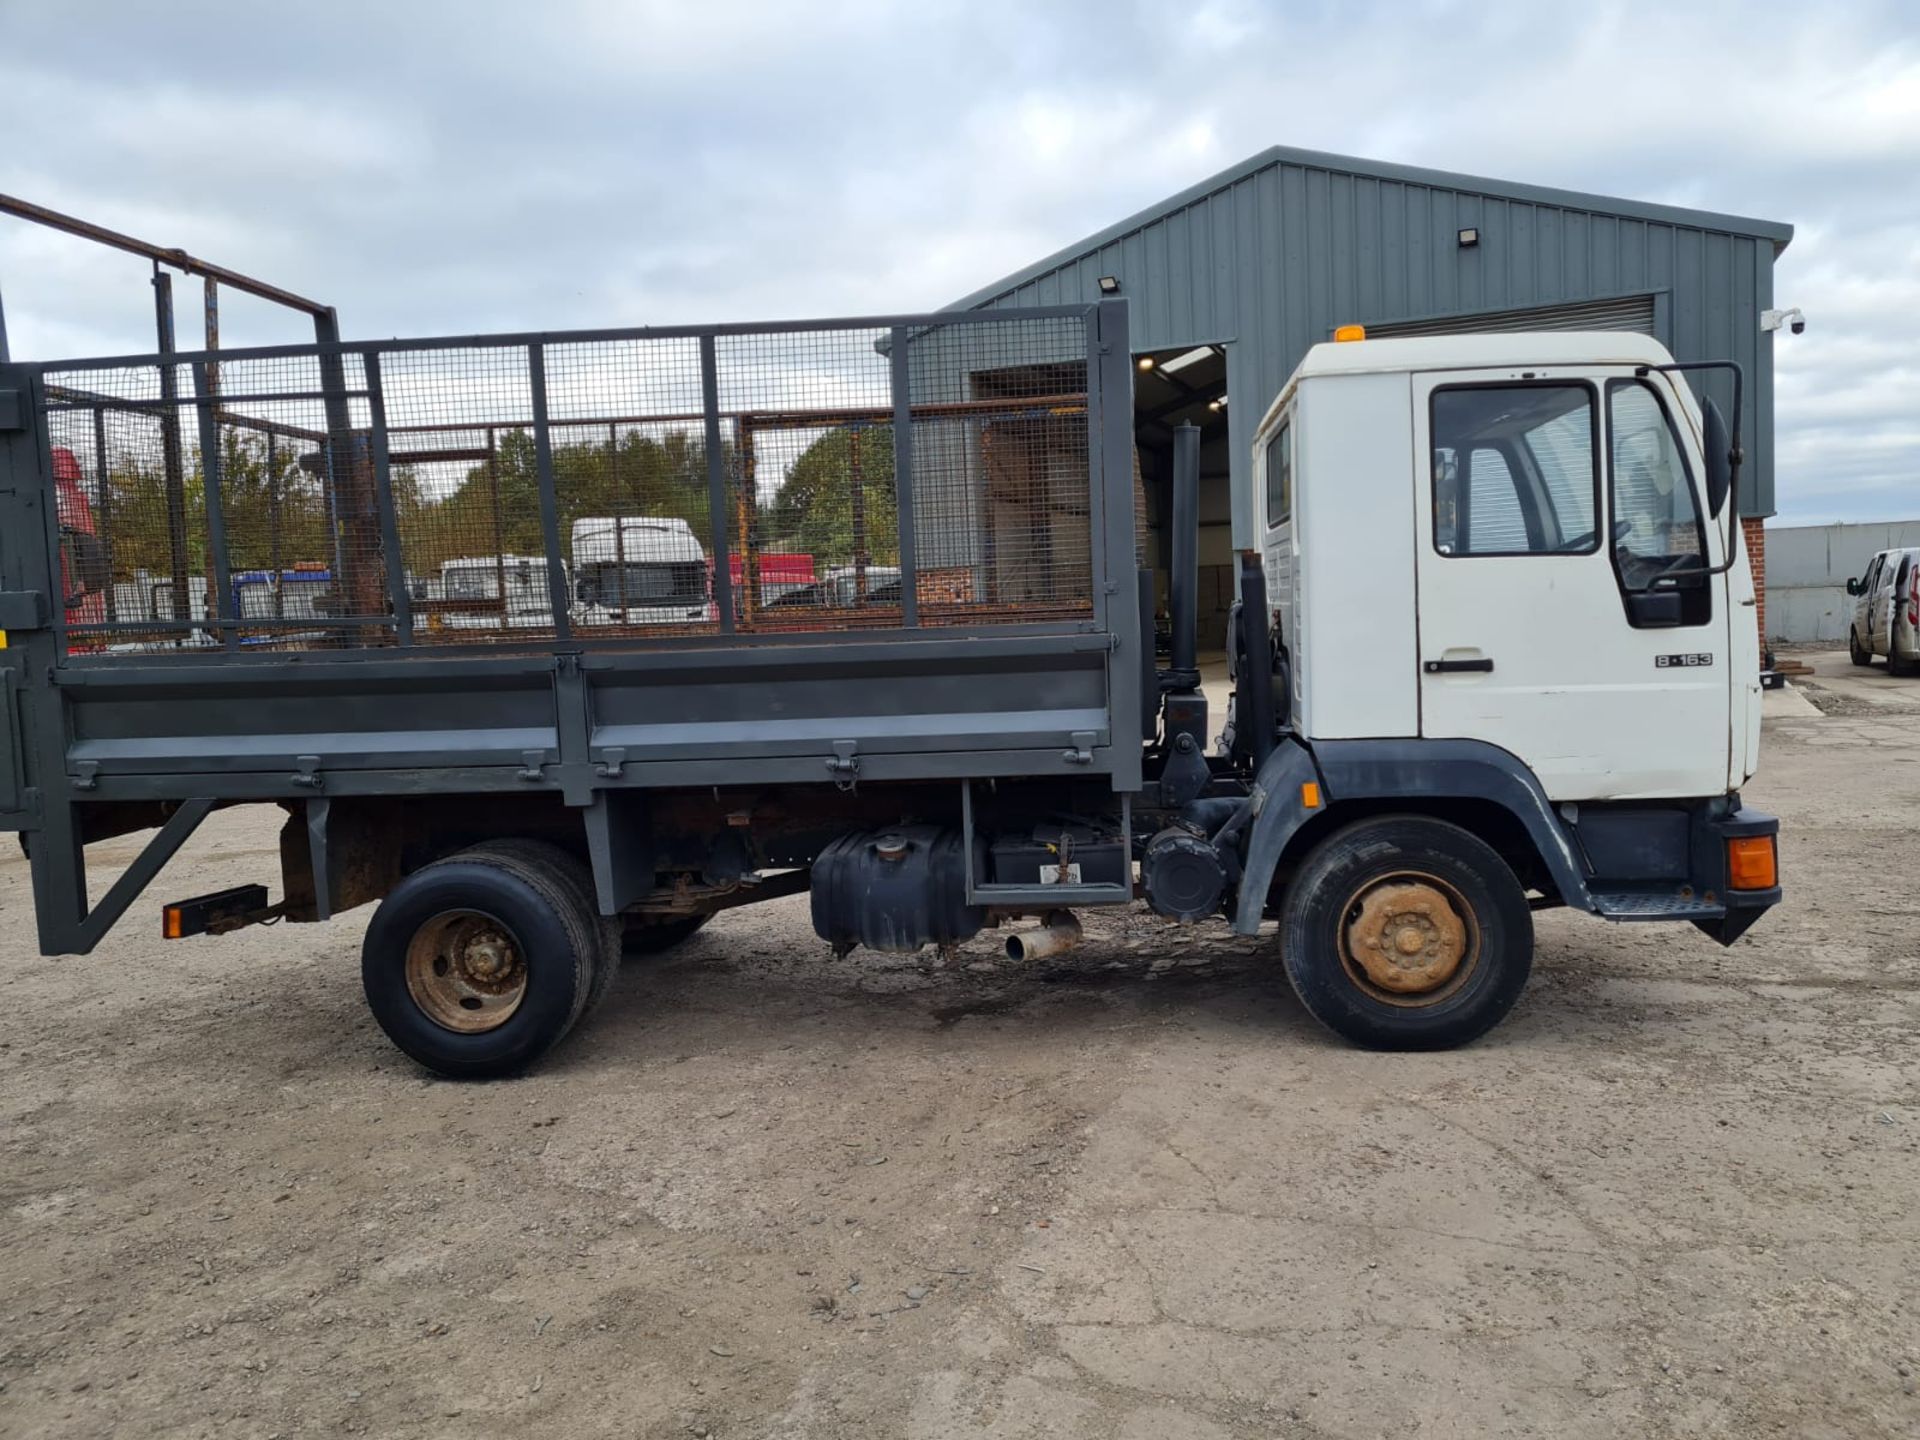 1999 man le8 tipper - Image 11 of 11